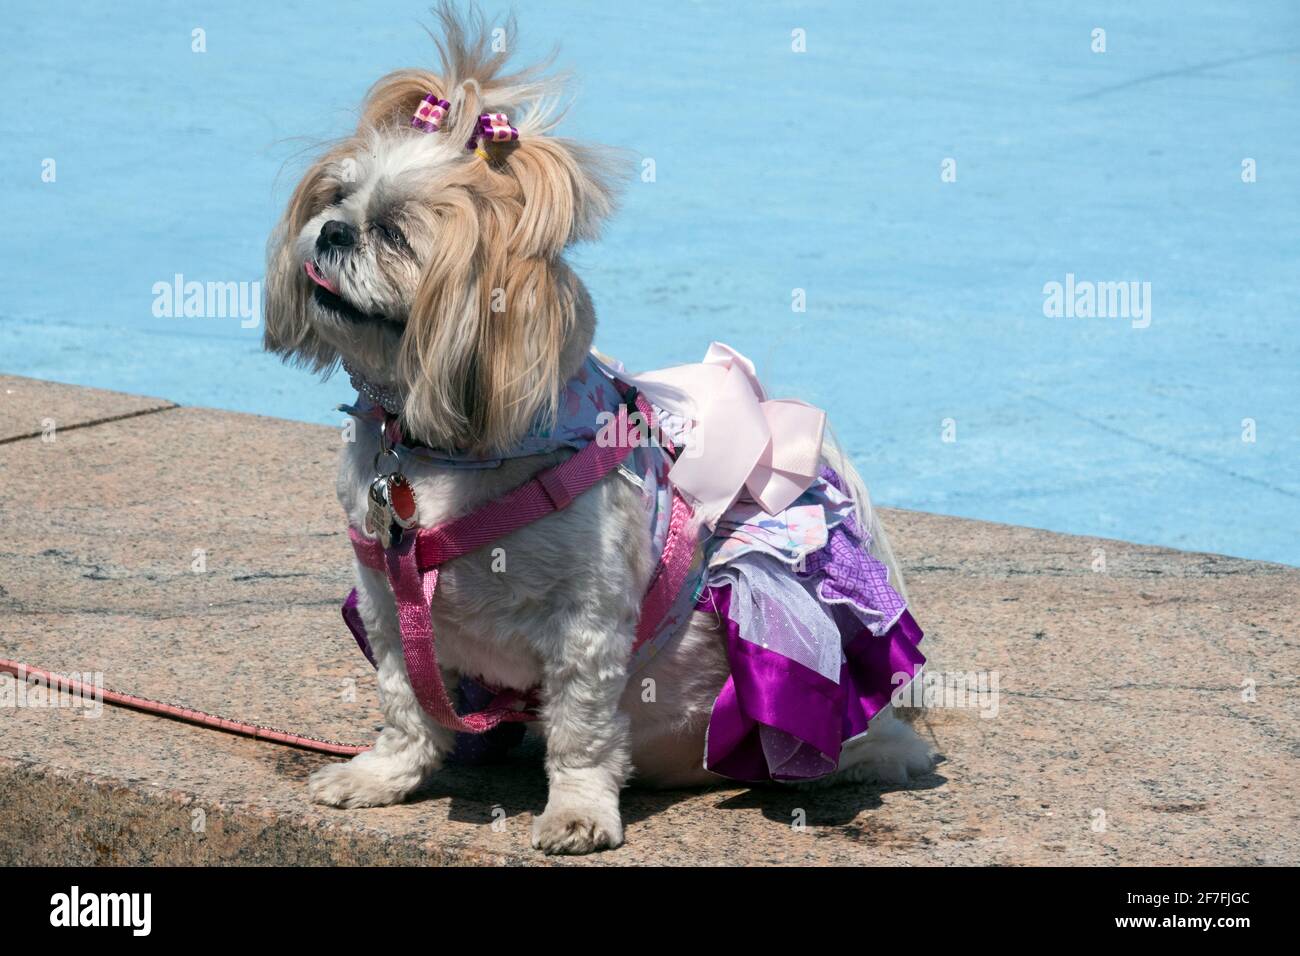 A Shih Tzu dog dressed for Easter Sunday. In a park in Queens, New York City. Stock Photo